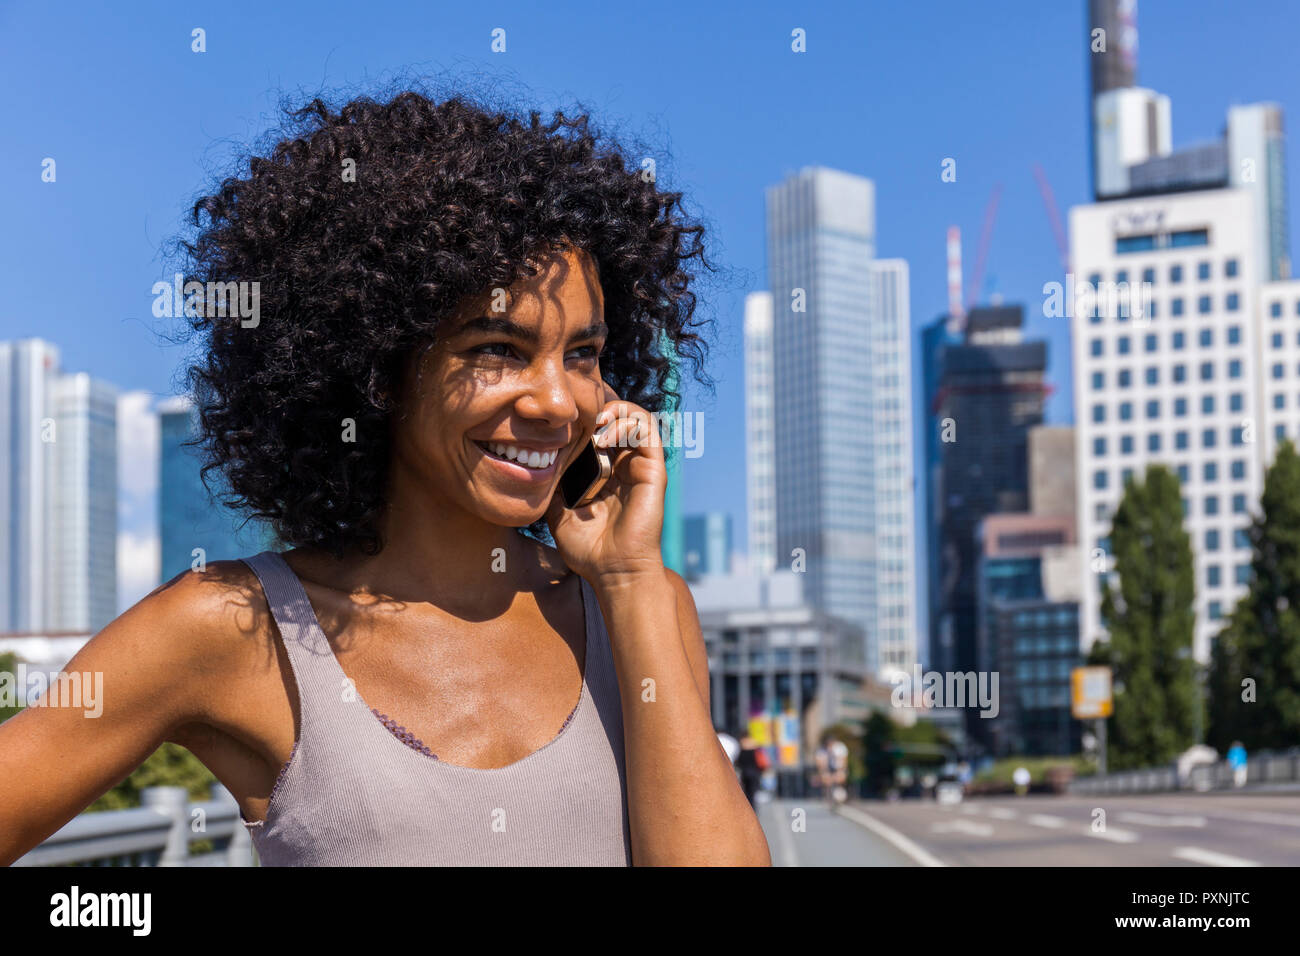 Germany, Frankfurt, portrait of smiling young woman with curly hair on the phone Stock Photo